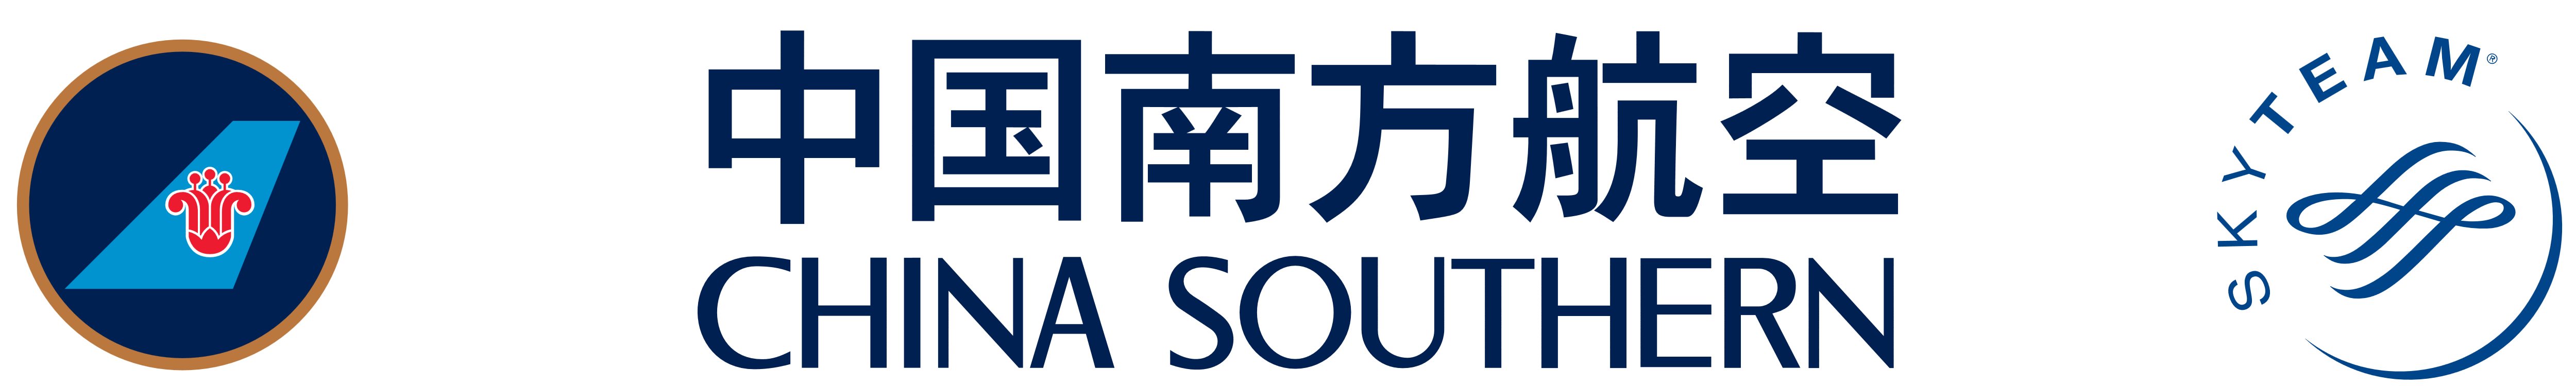 China-Southern Airlines logot